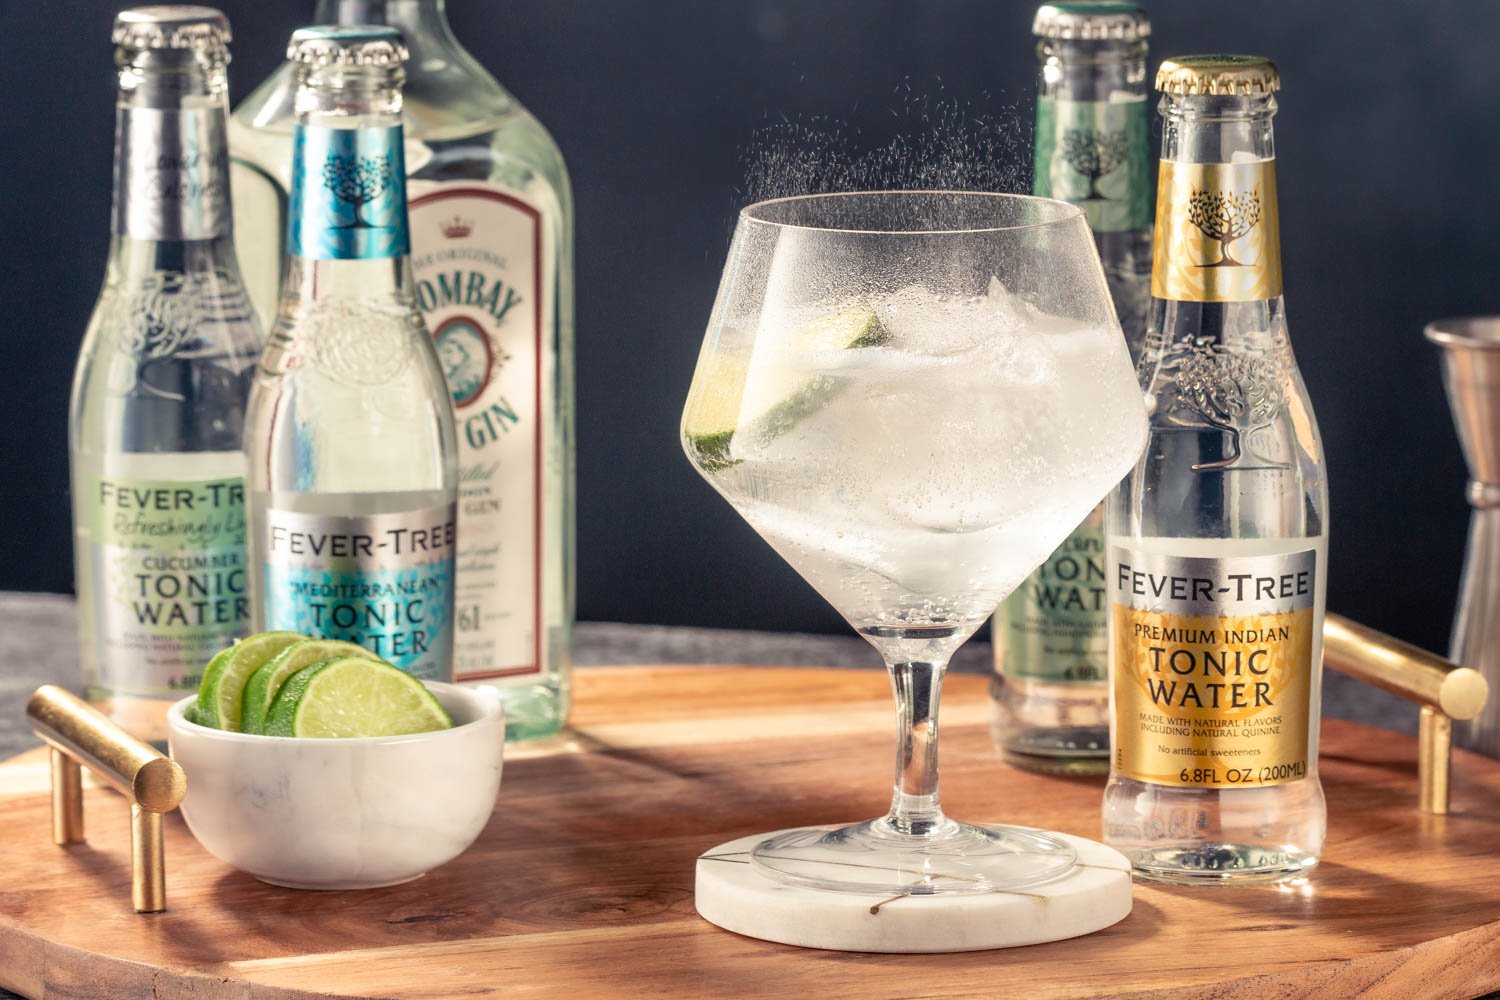 gin and tonic made with fever tree tonic water